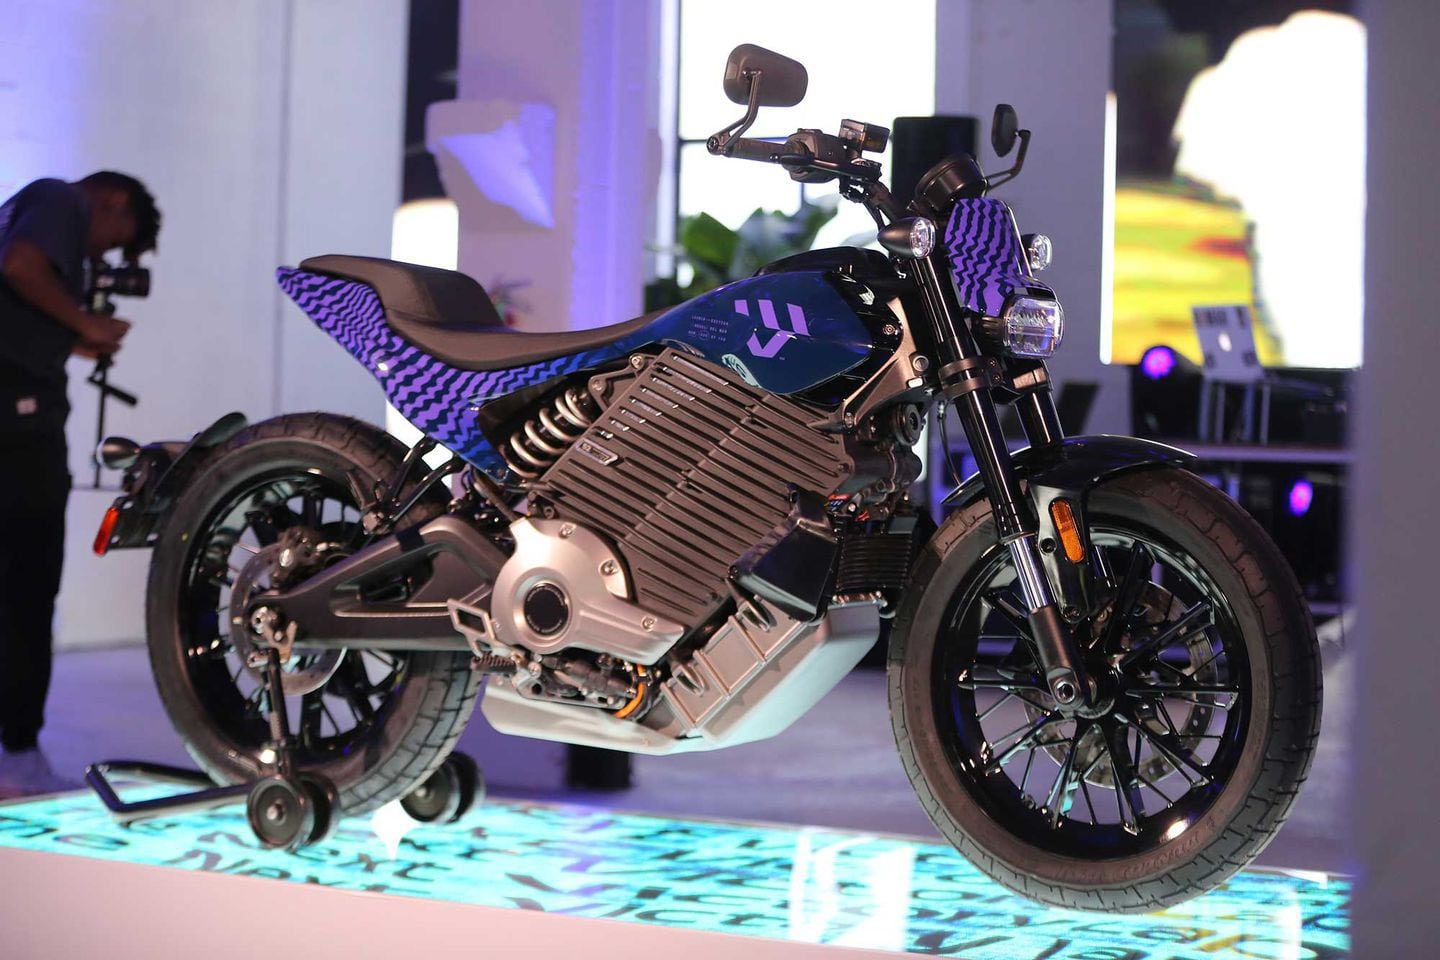 We got a peek at the LiveWire Del Mar Launch Edition last May, and the production version of the bike will likely be identical save for some details – though we haven’t seen it in the metal just yet.